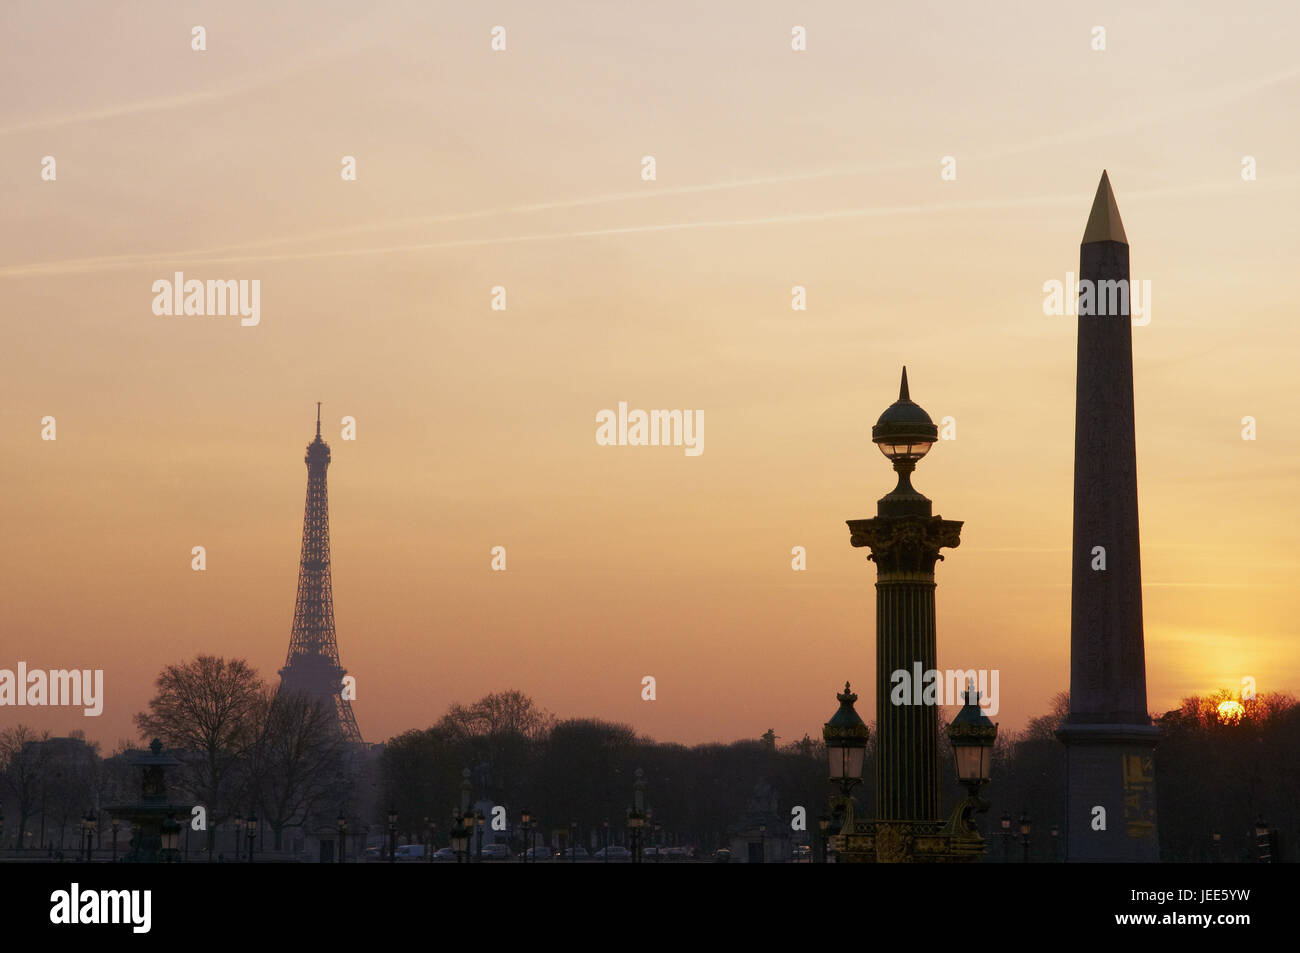 France, Paris, Concorde square, obelisk of Luxur and Eiffel Tower in the background, Stock Photo